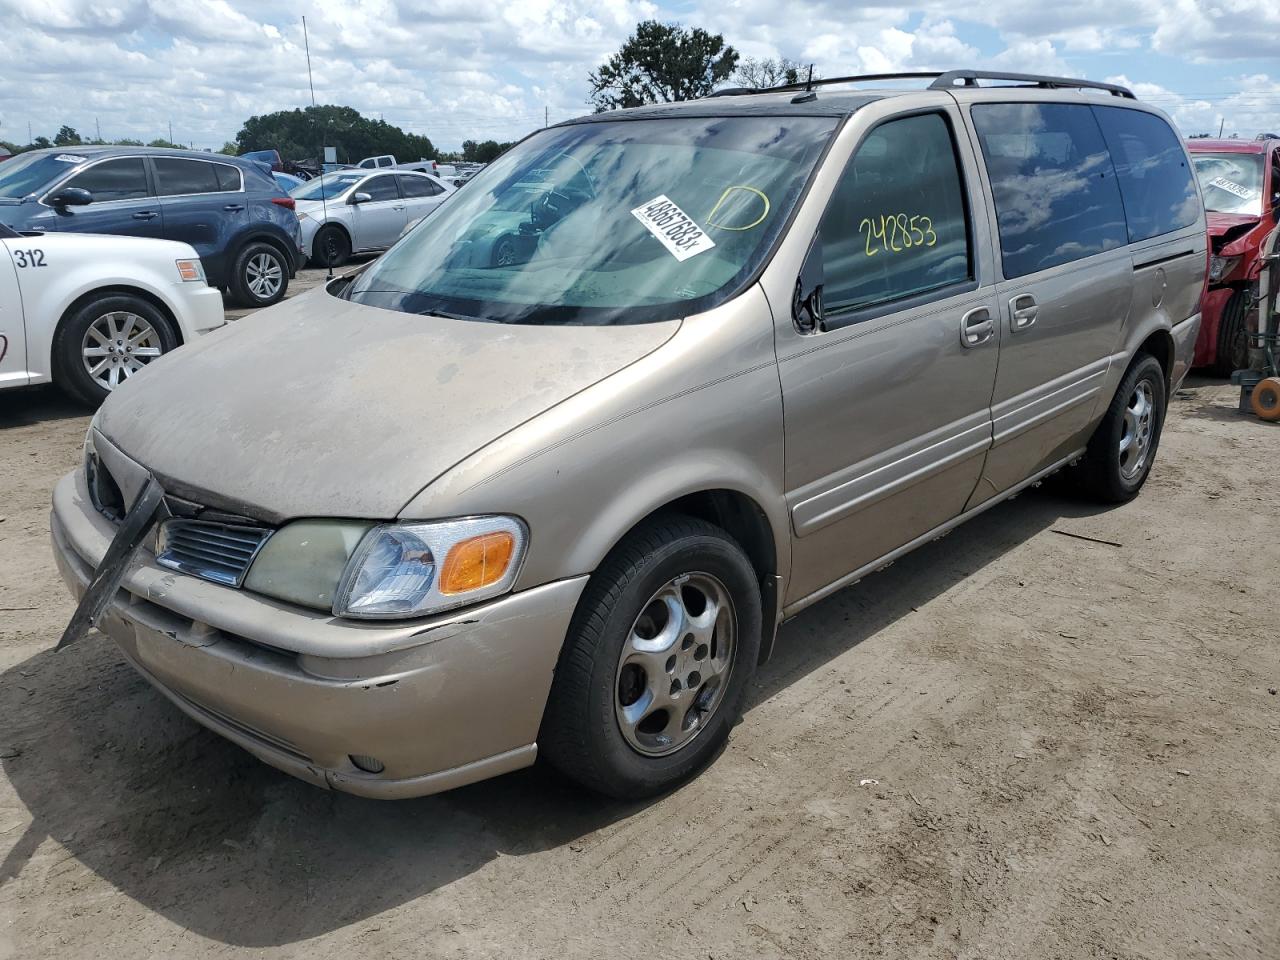 2002 Oldsmobile Silhouette for sale at Copart Riverview, FL Lot #48667*** |  SalvageReseller.com